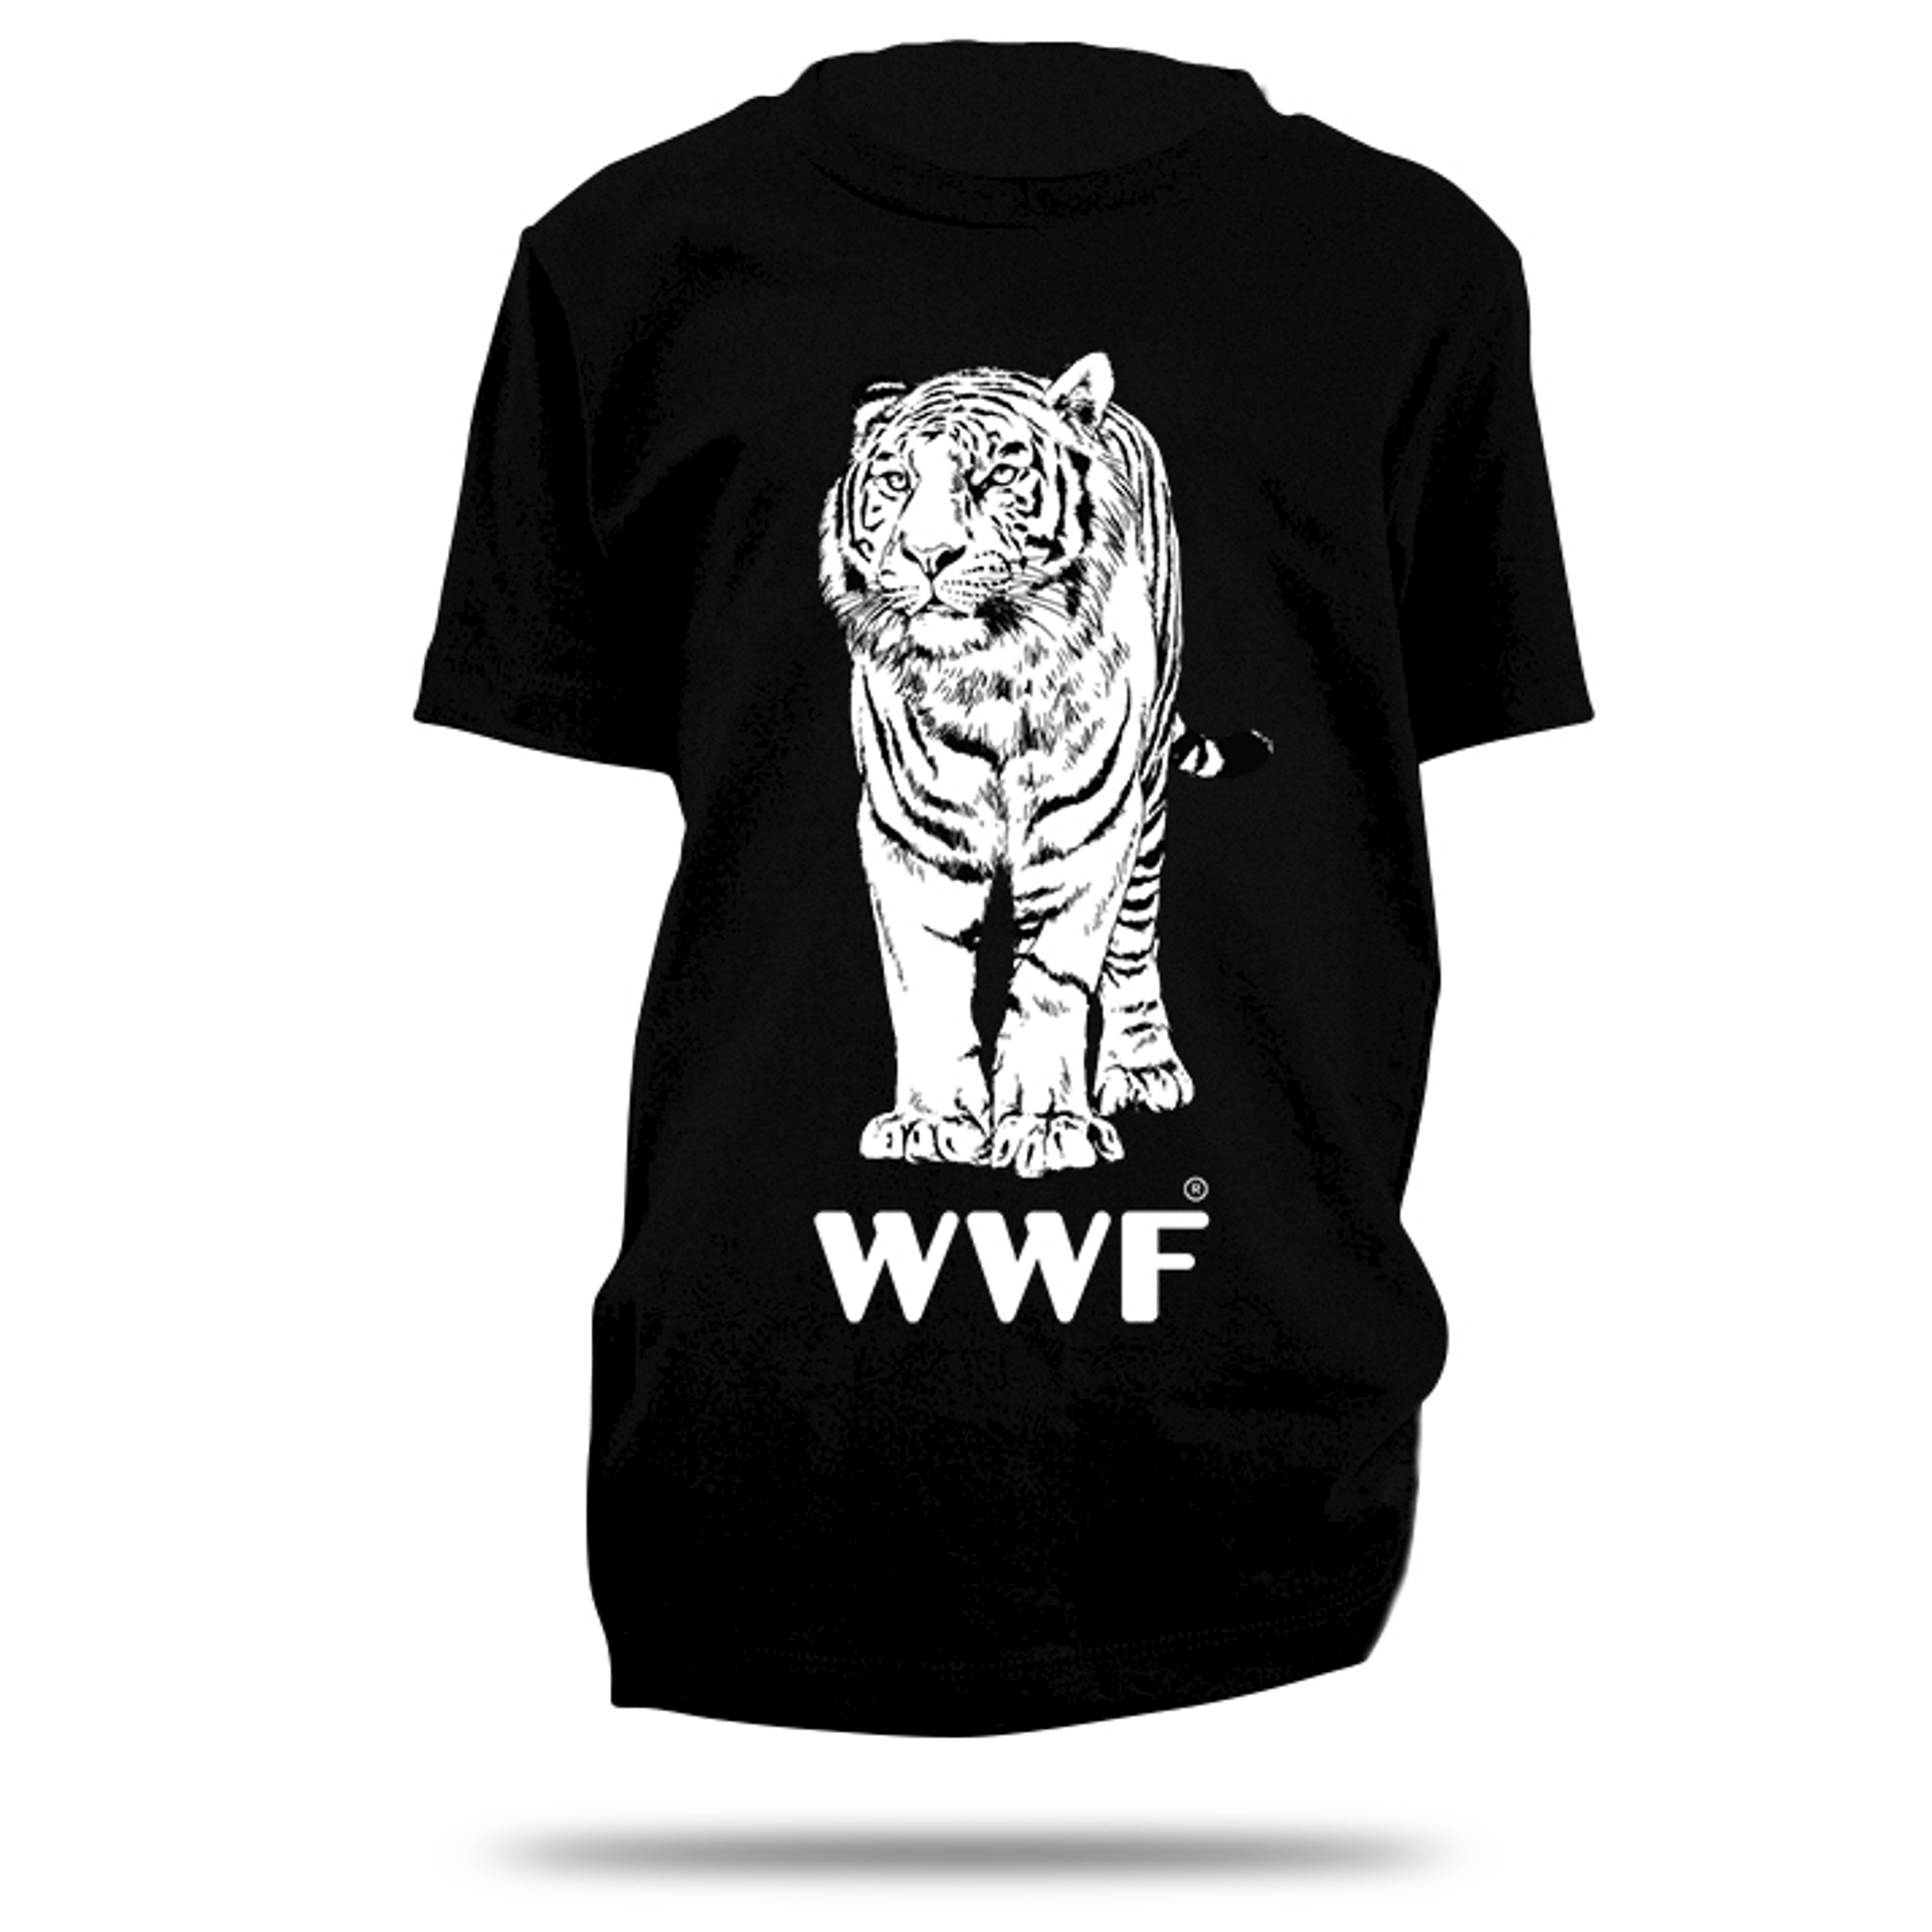 Black Youth T-Shirt with White Tiger Illustration on Chest